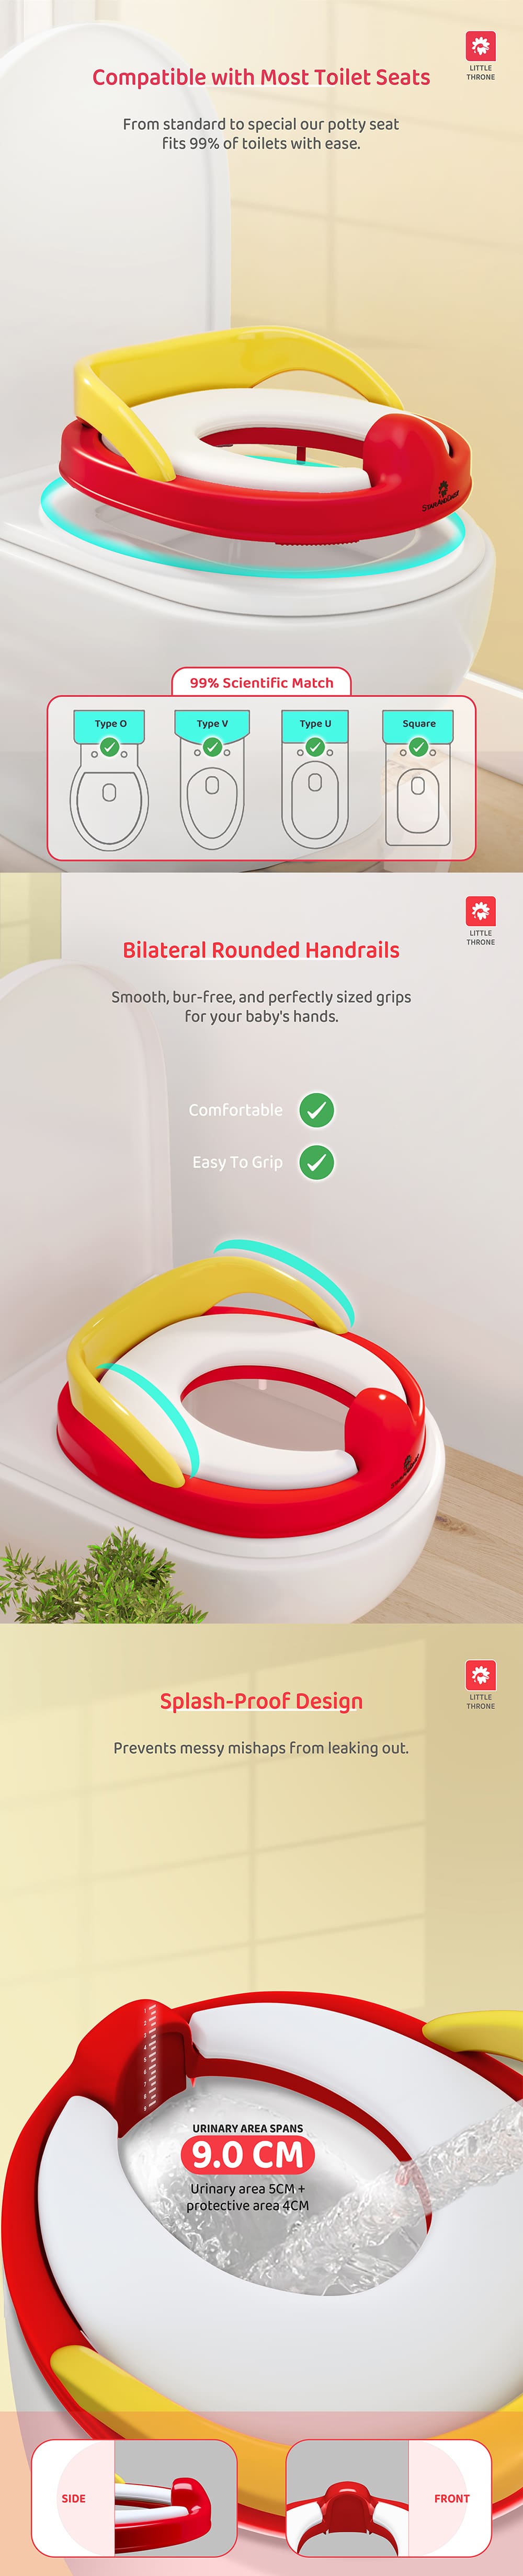 Kids Potty Training Seat with Rounded Handrail